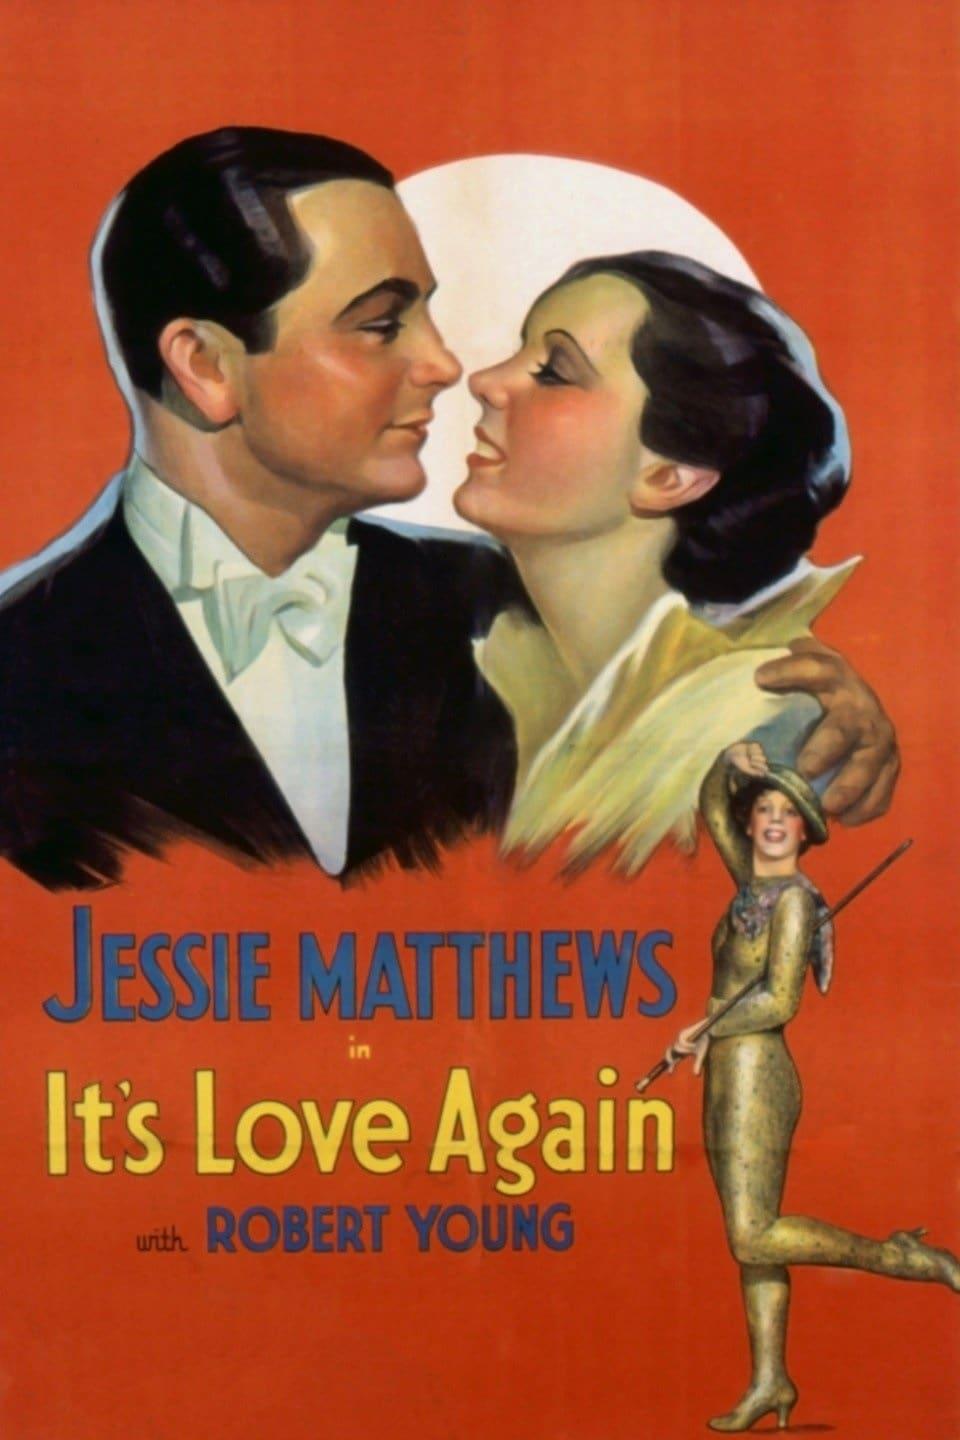 It's Love Again poster